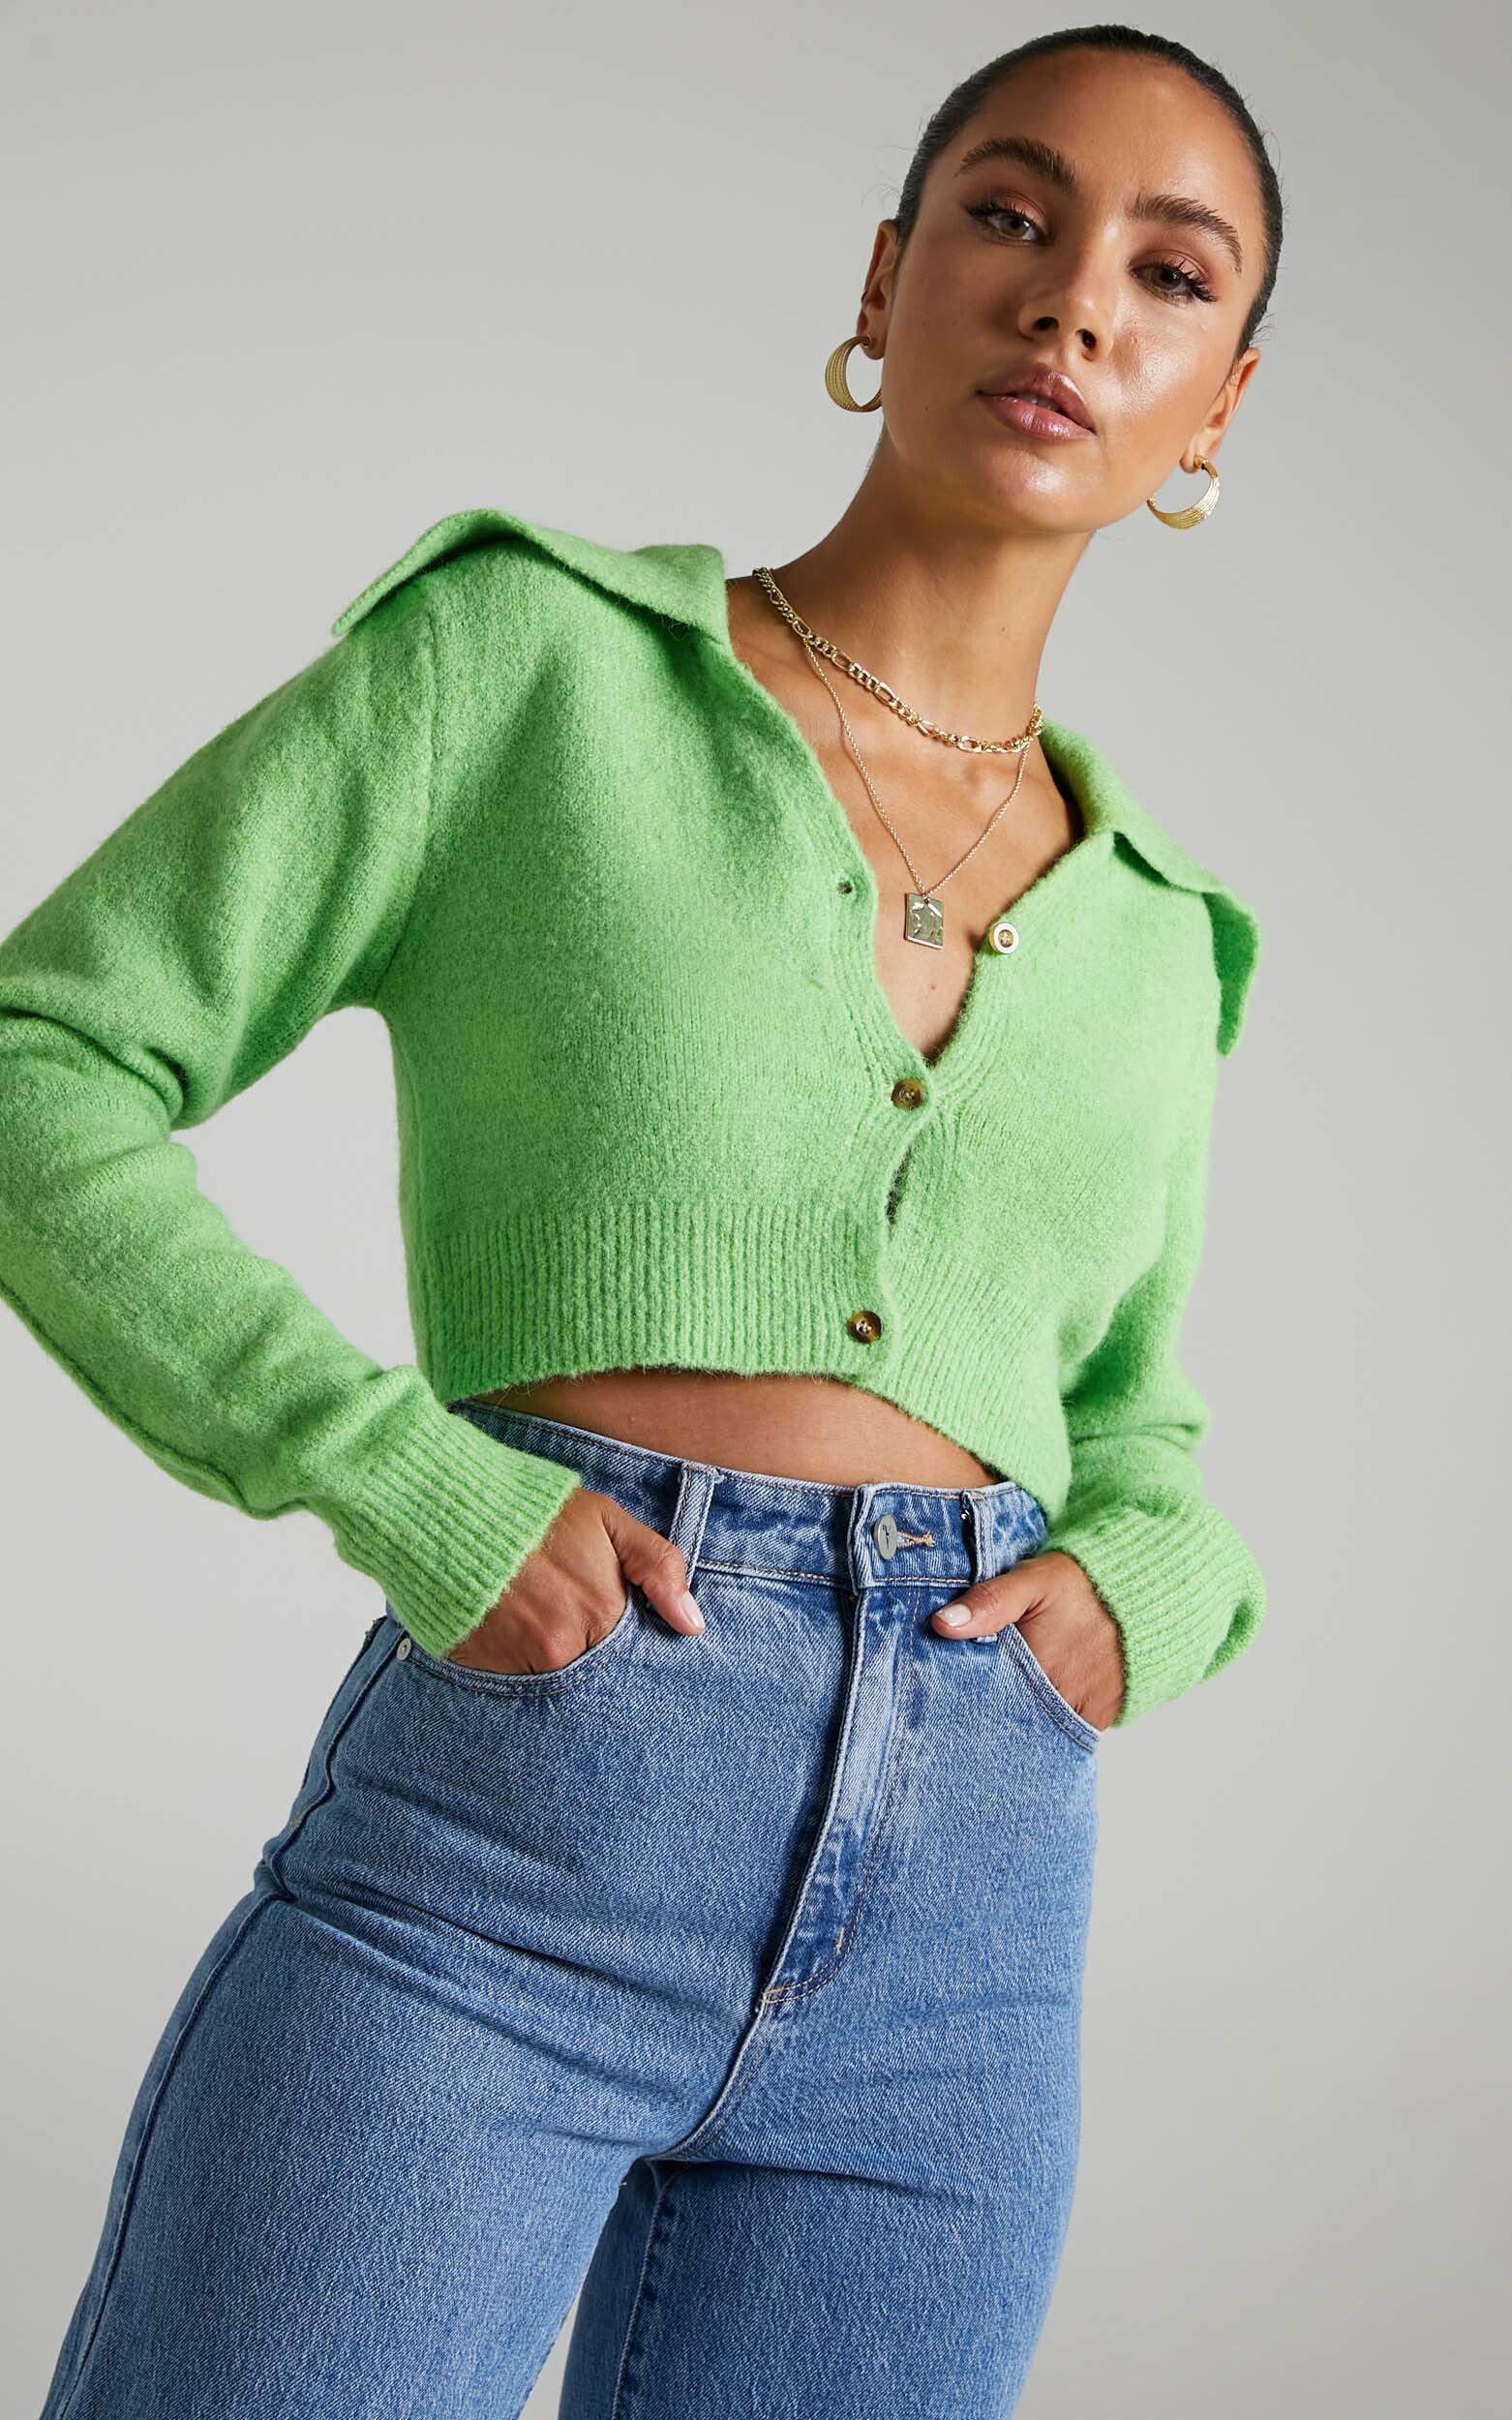 Colee Collared Cropped Cardigan in Lime - L, GRN2, hi-res image number null